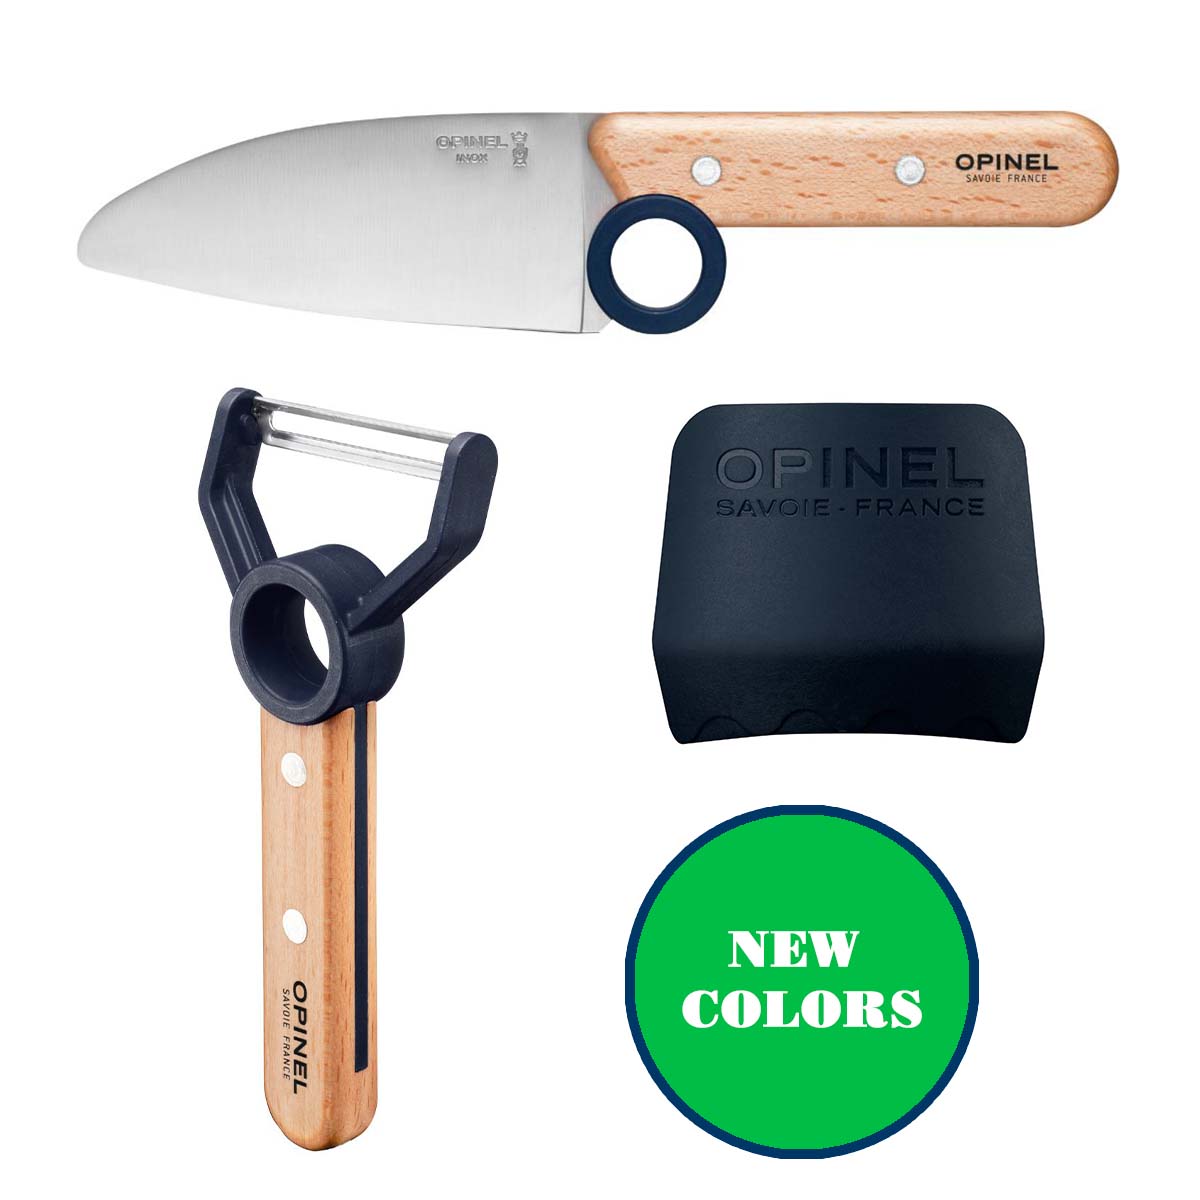 Chef Knife - Complete Care Shop